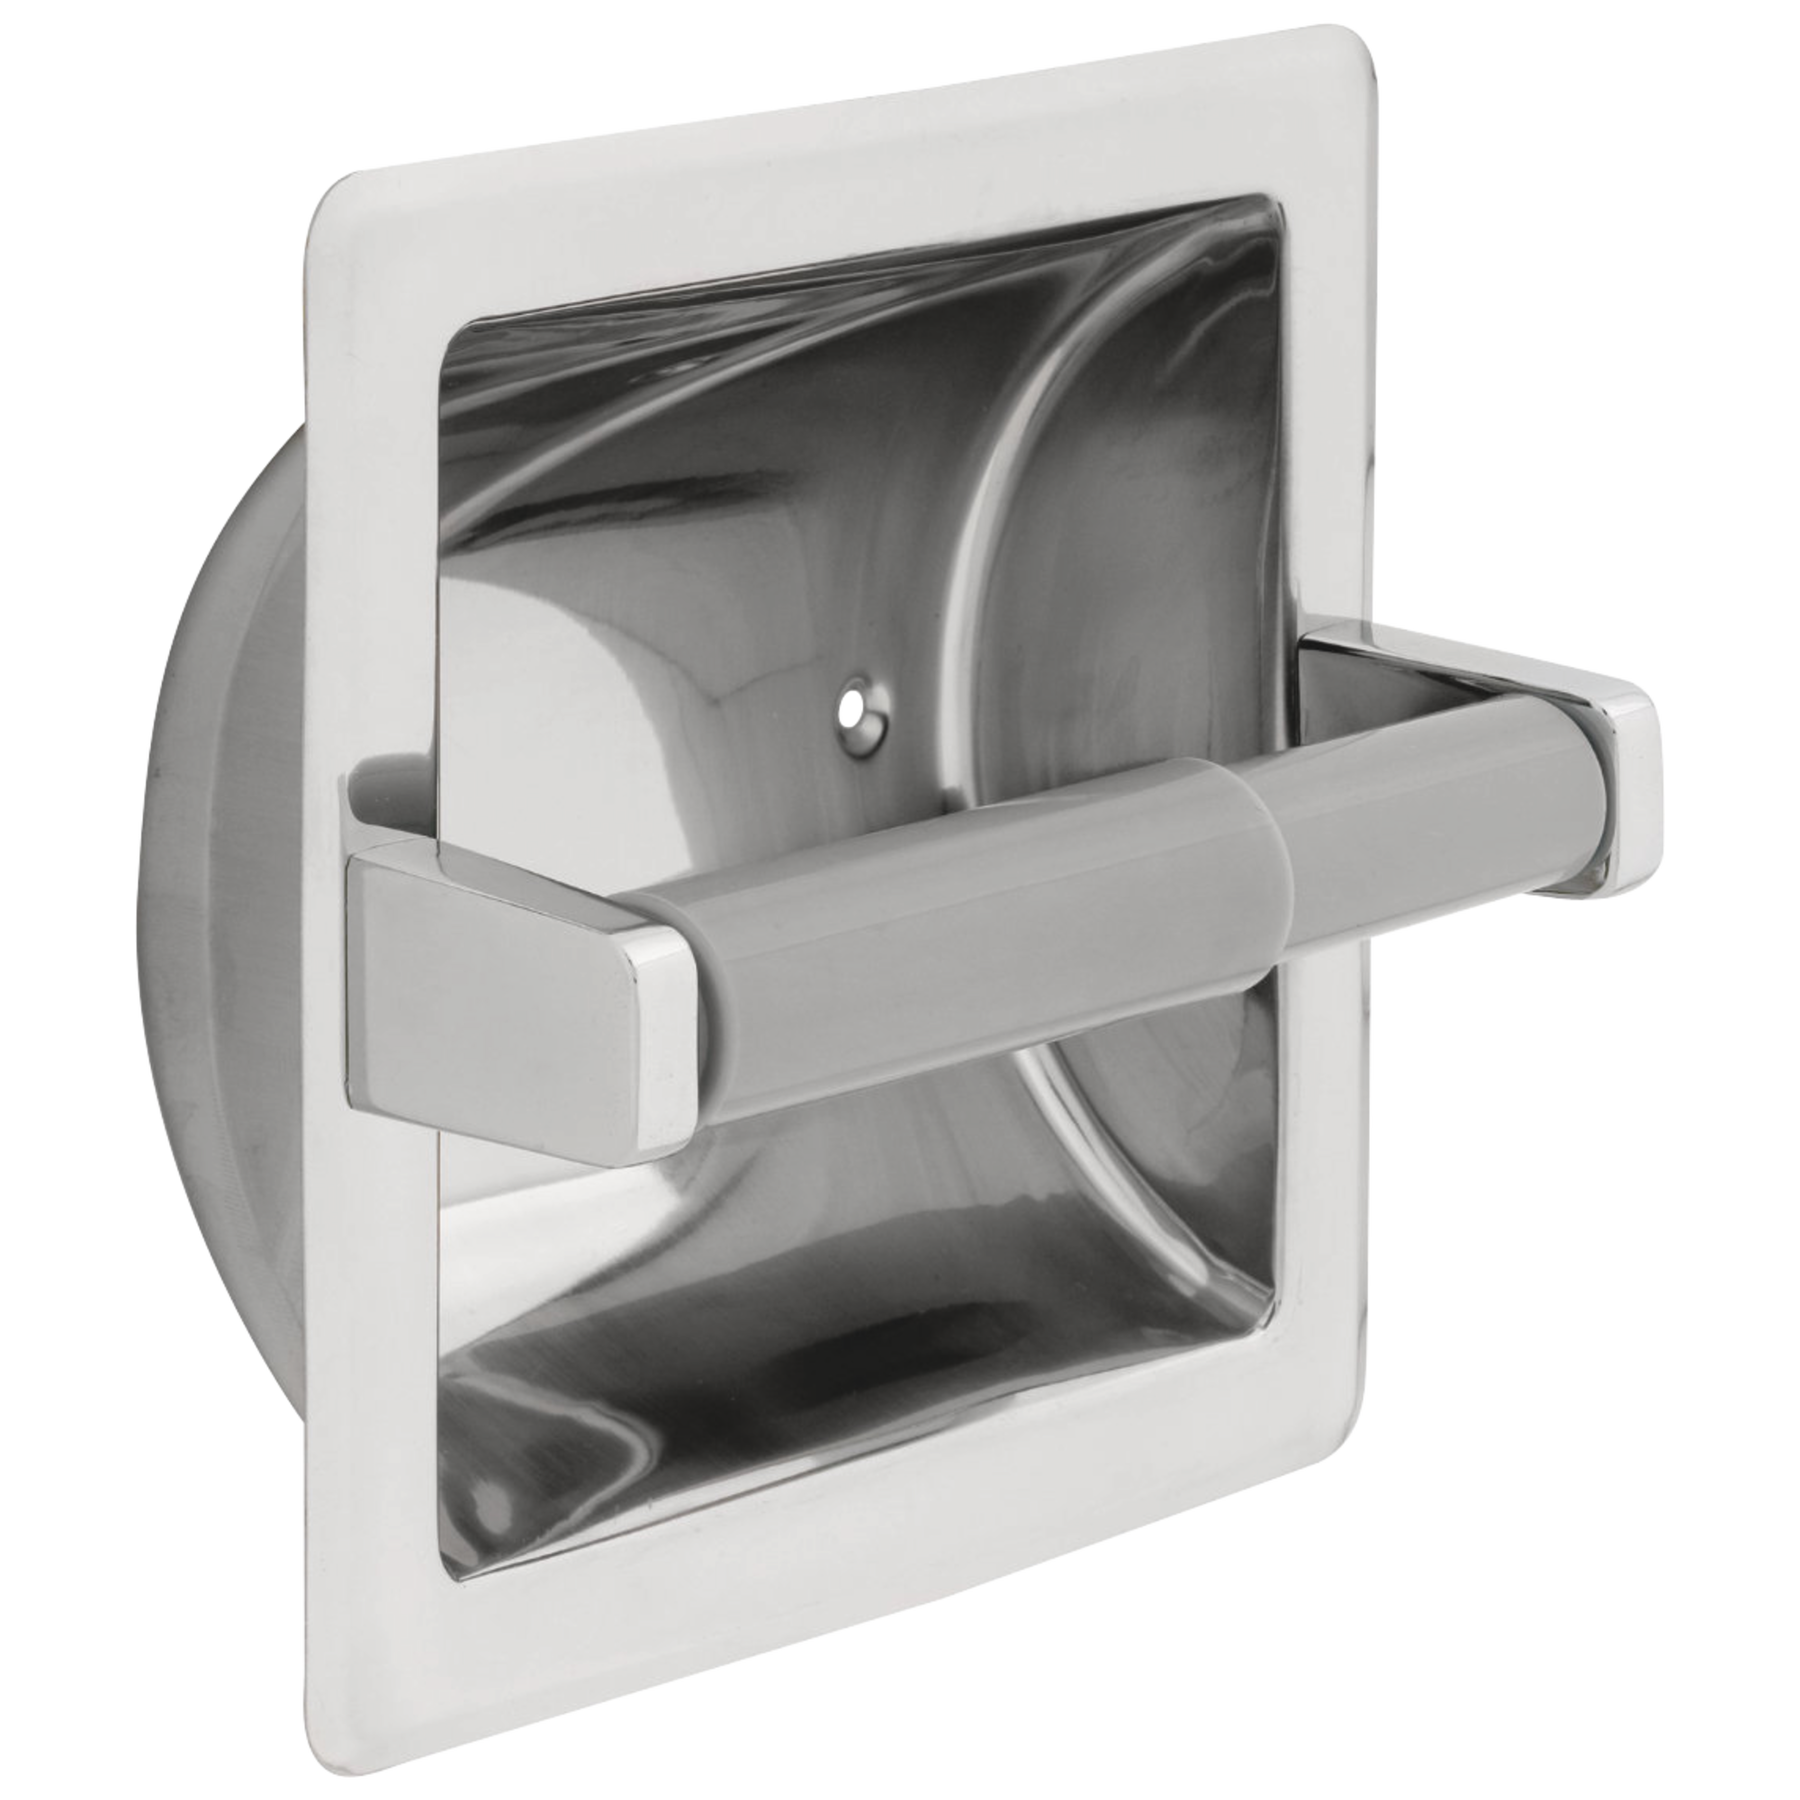 Recessed Toilet Tissue Holder – Frost